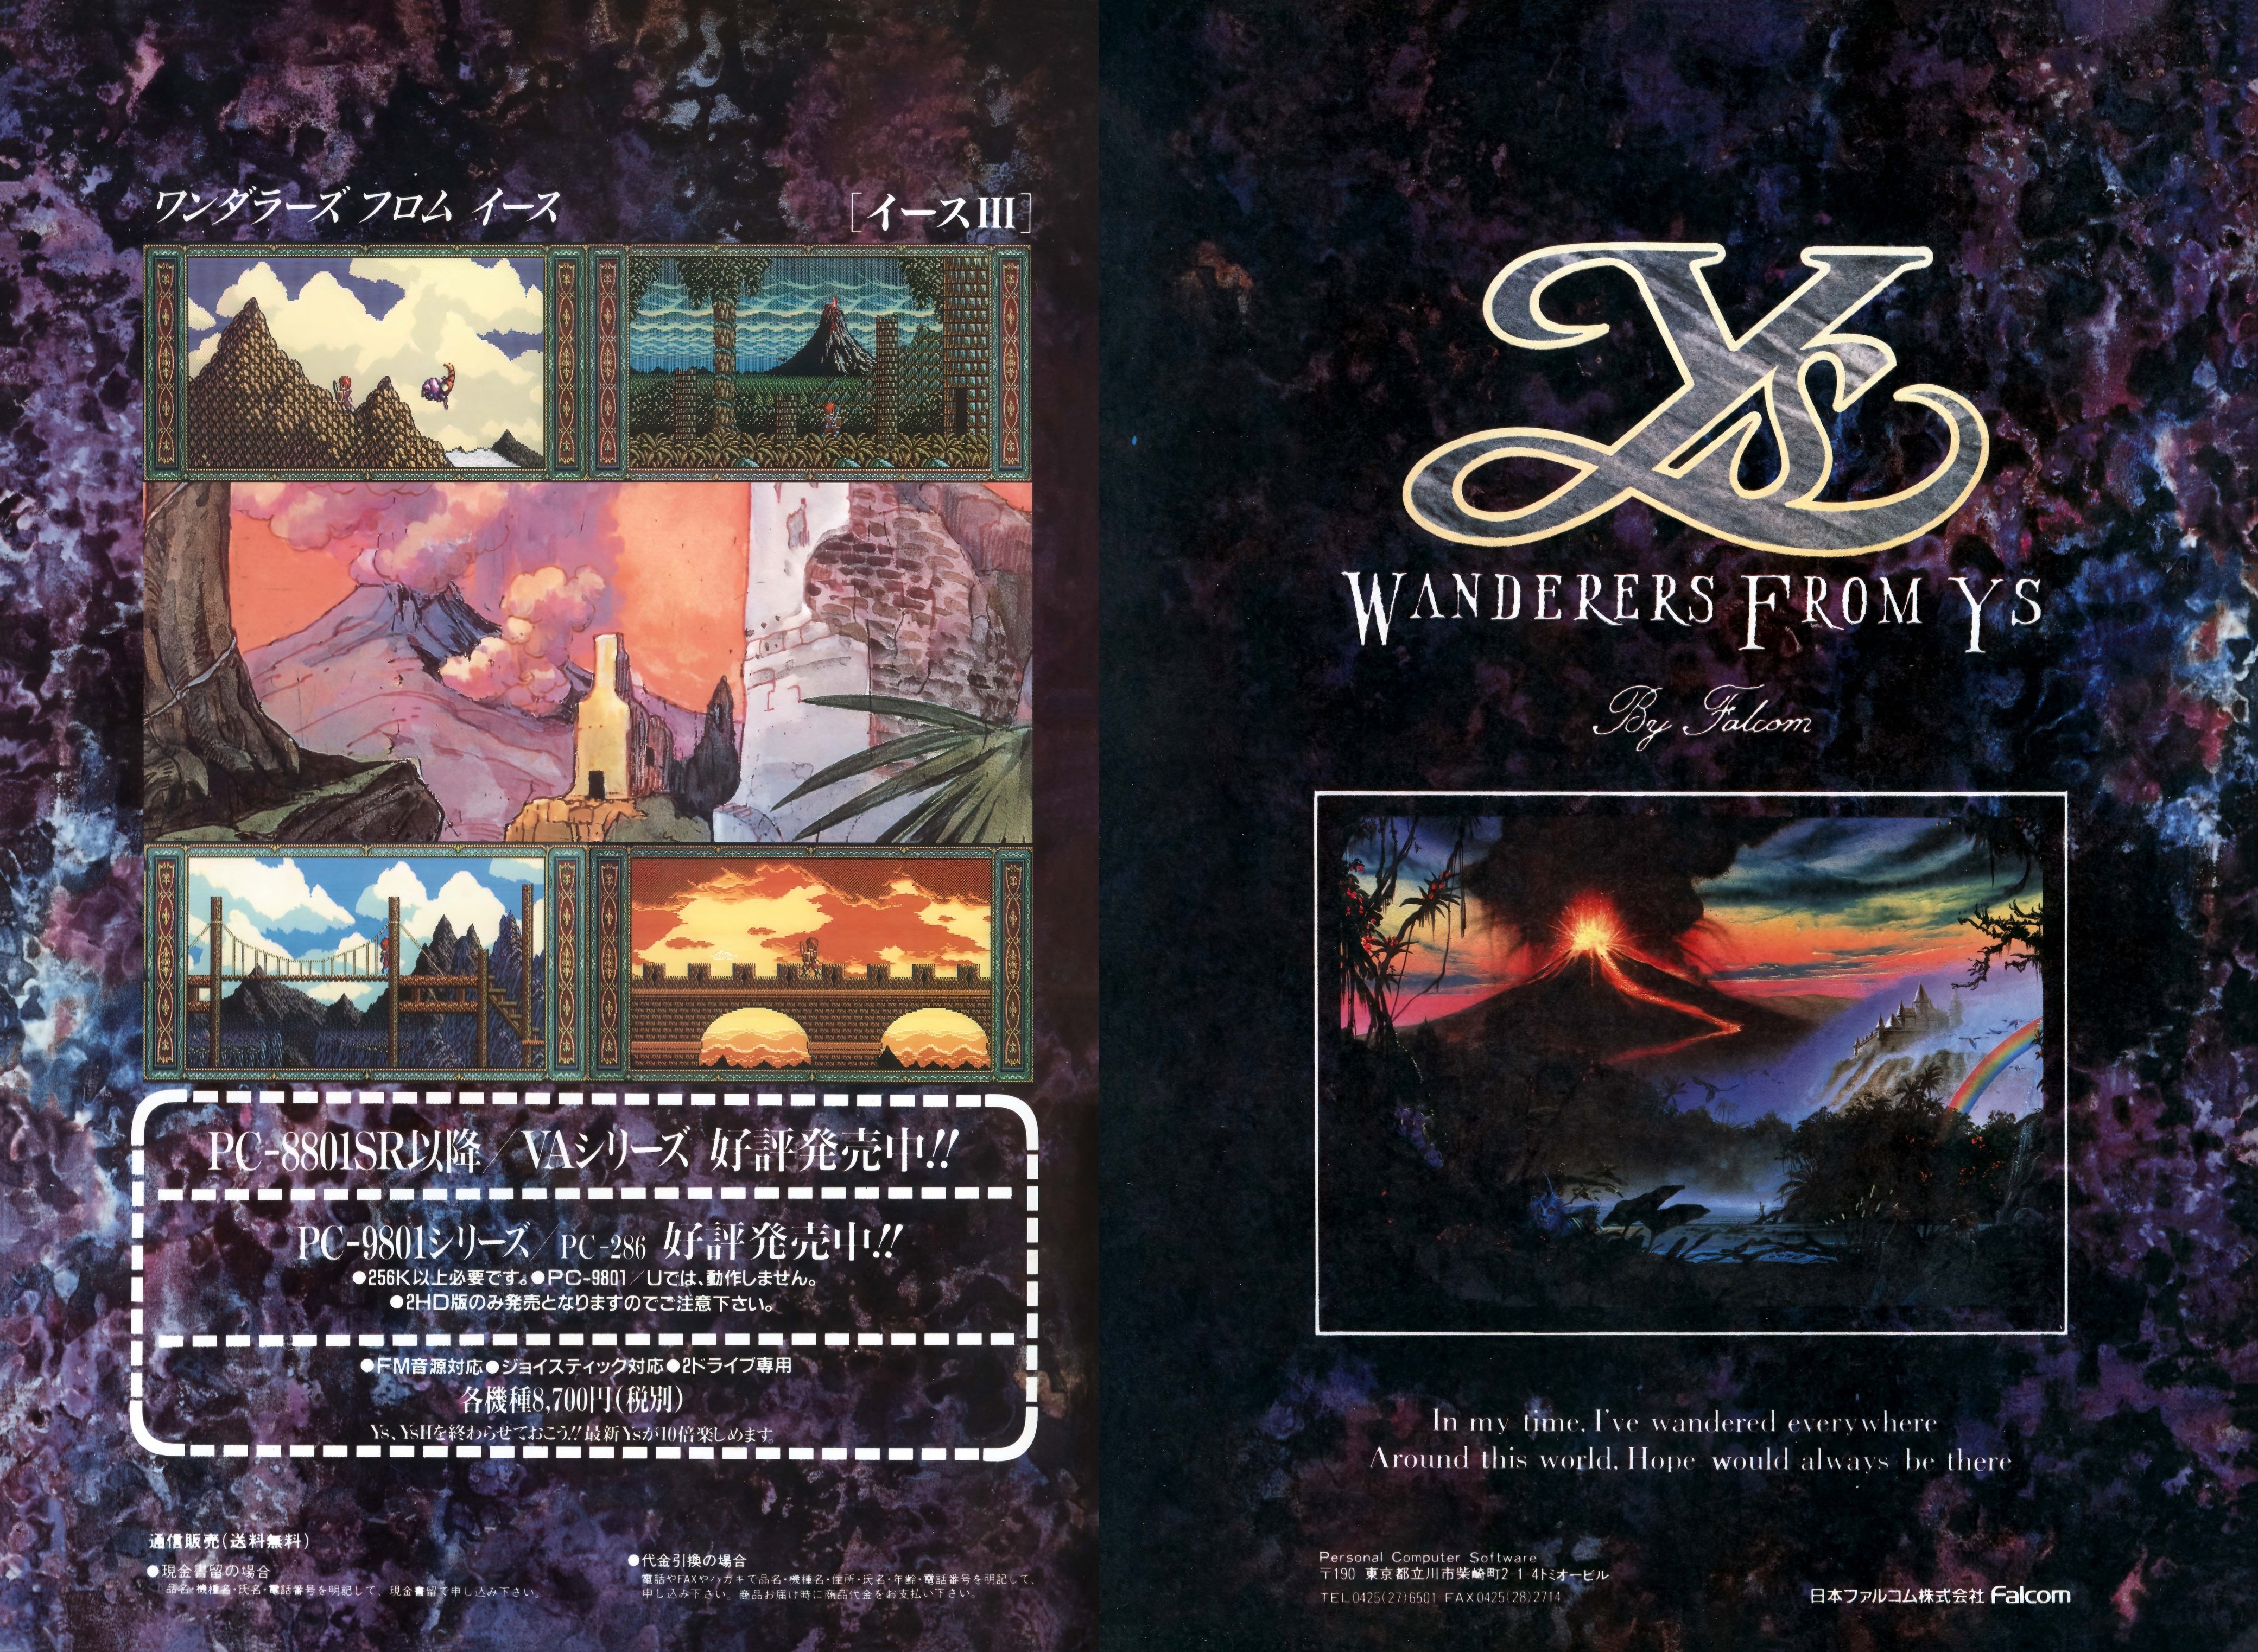 Ys III: Wanderers from Ys screenshots, images and pictures - Giant